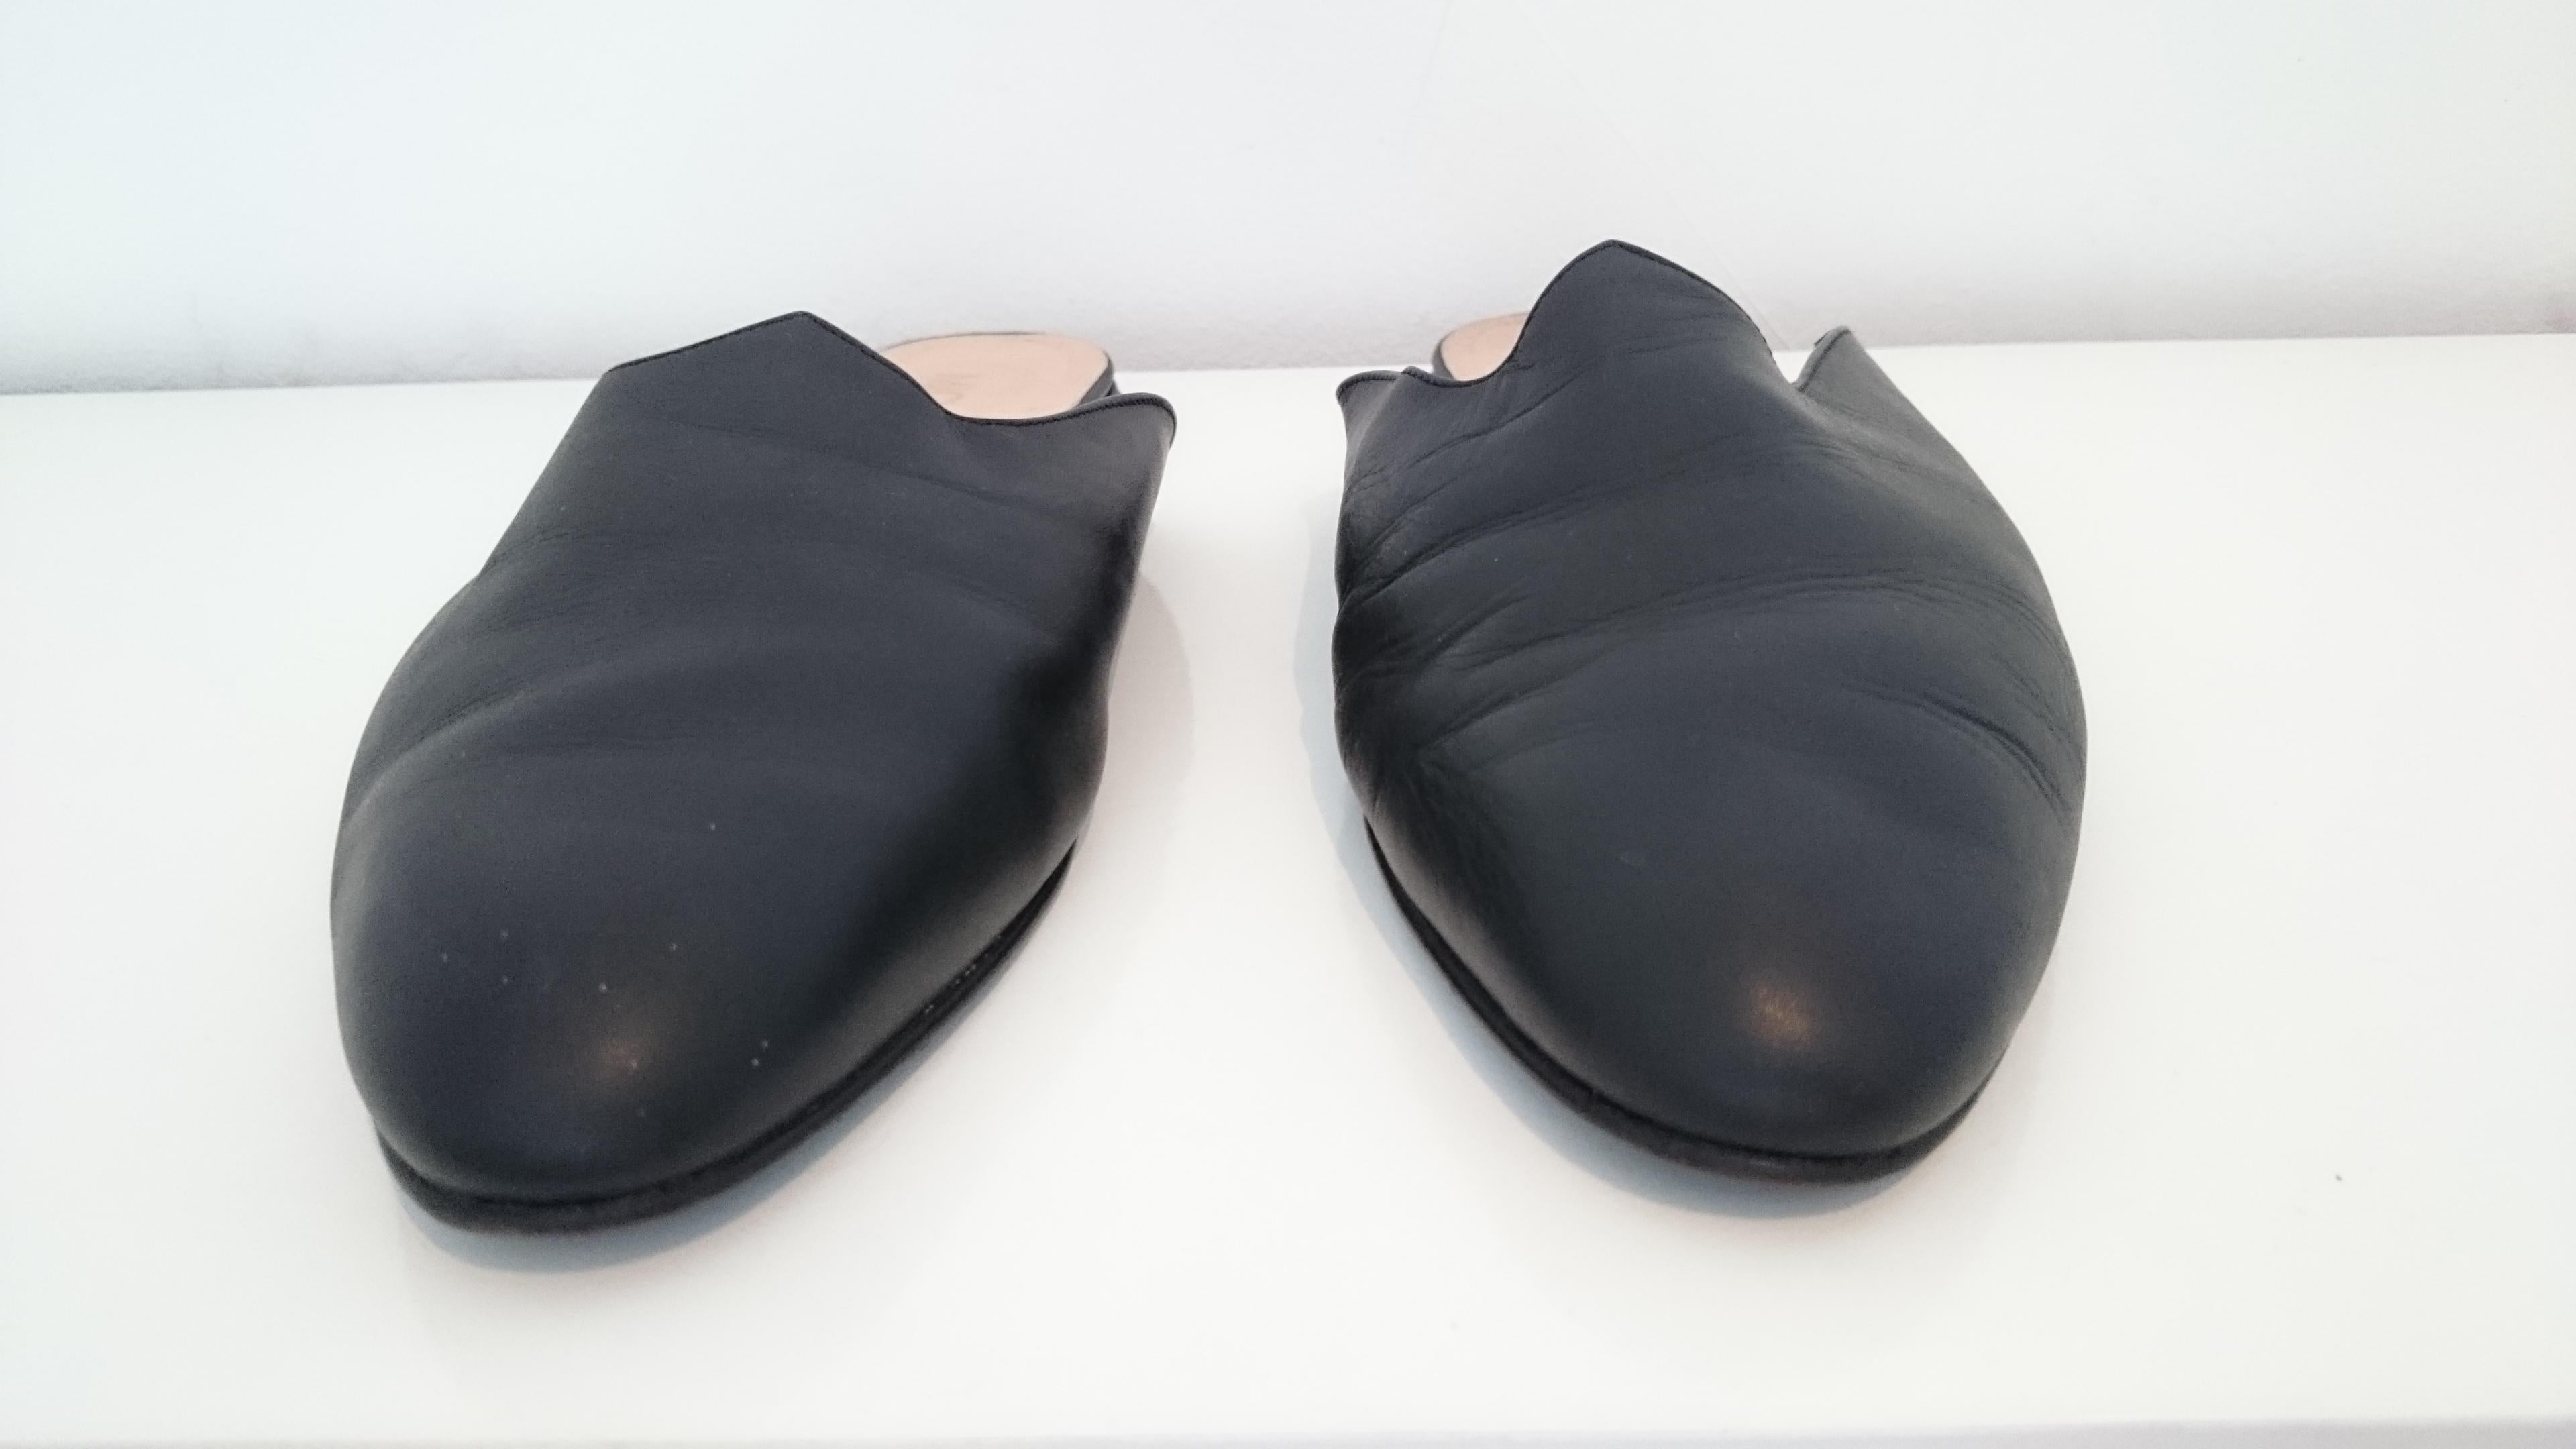 Michael Klein Black Leather Slippers for Home.
Size: 9B (US)
Great conditions.
Made in Italy